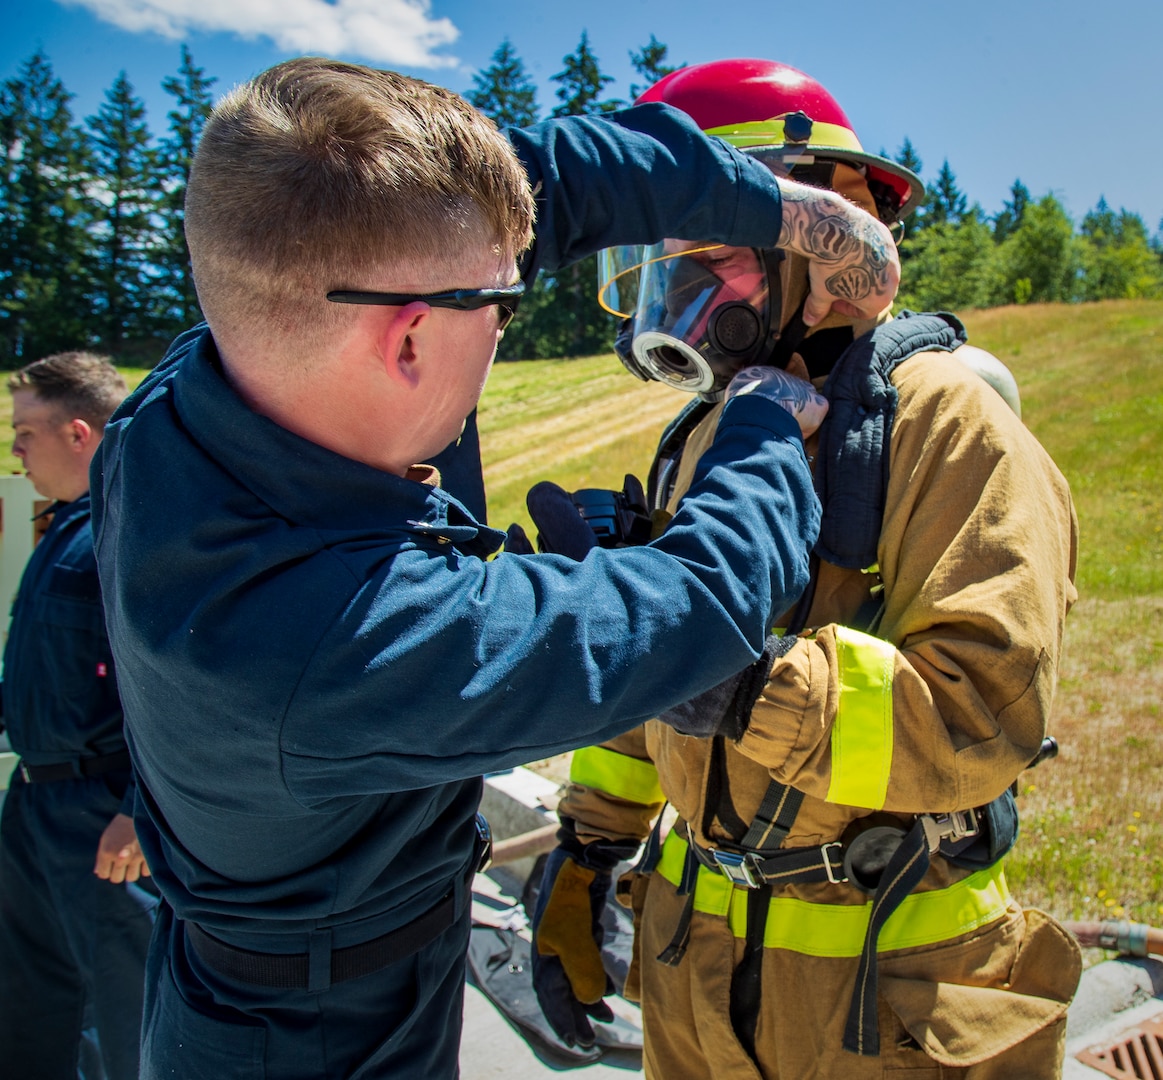 Information Services Technician First Class Mason Foreman, USS Connecticut (SSN 22), helps a shipmate don firefighting gear and performs essential safety checks on his mask, a self-contained breathing apparatus worn during fire fighting. (U.S. Navy Photo by Wendy Hallmark)